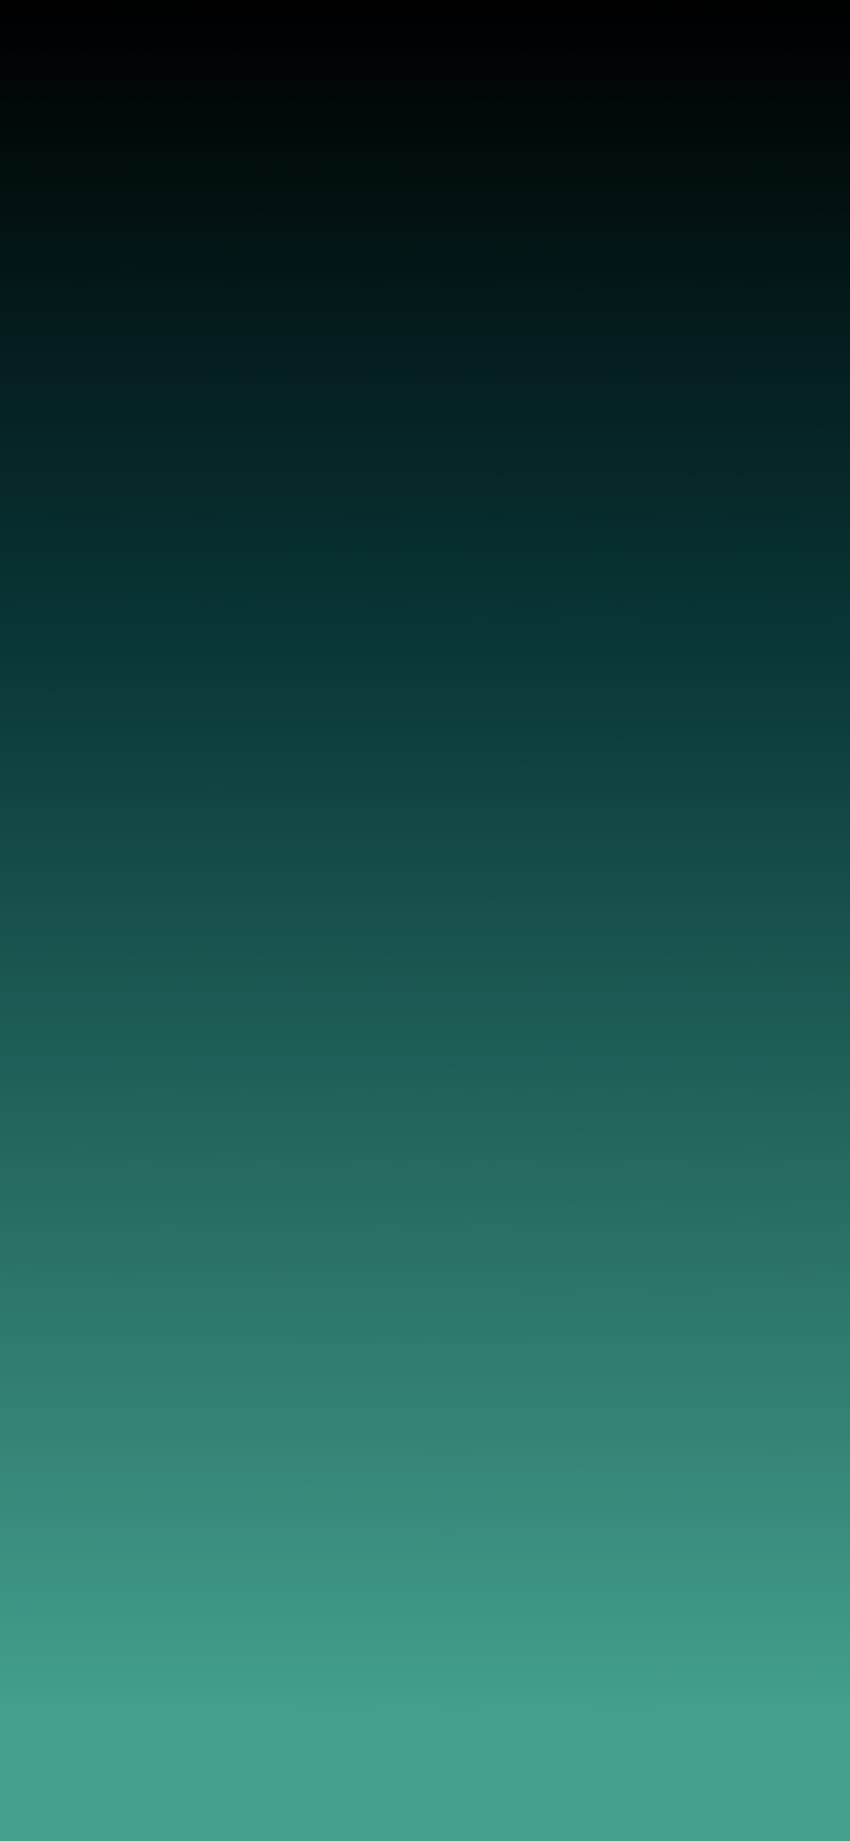 Black and Teal - , Black and Teal Background on Bat, Black and Green Gradient HD phone wallpaper